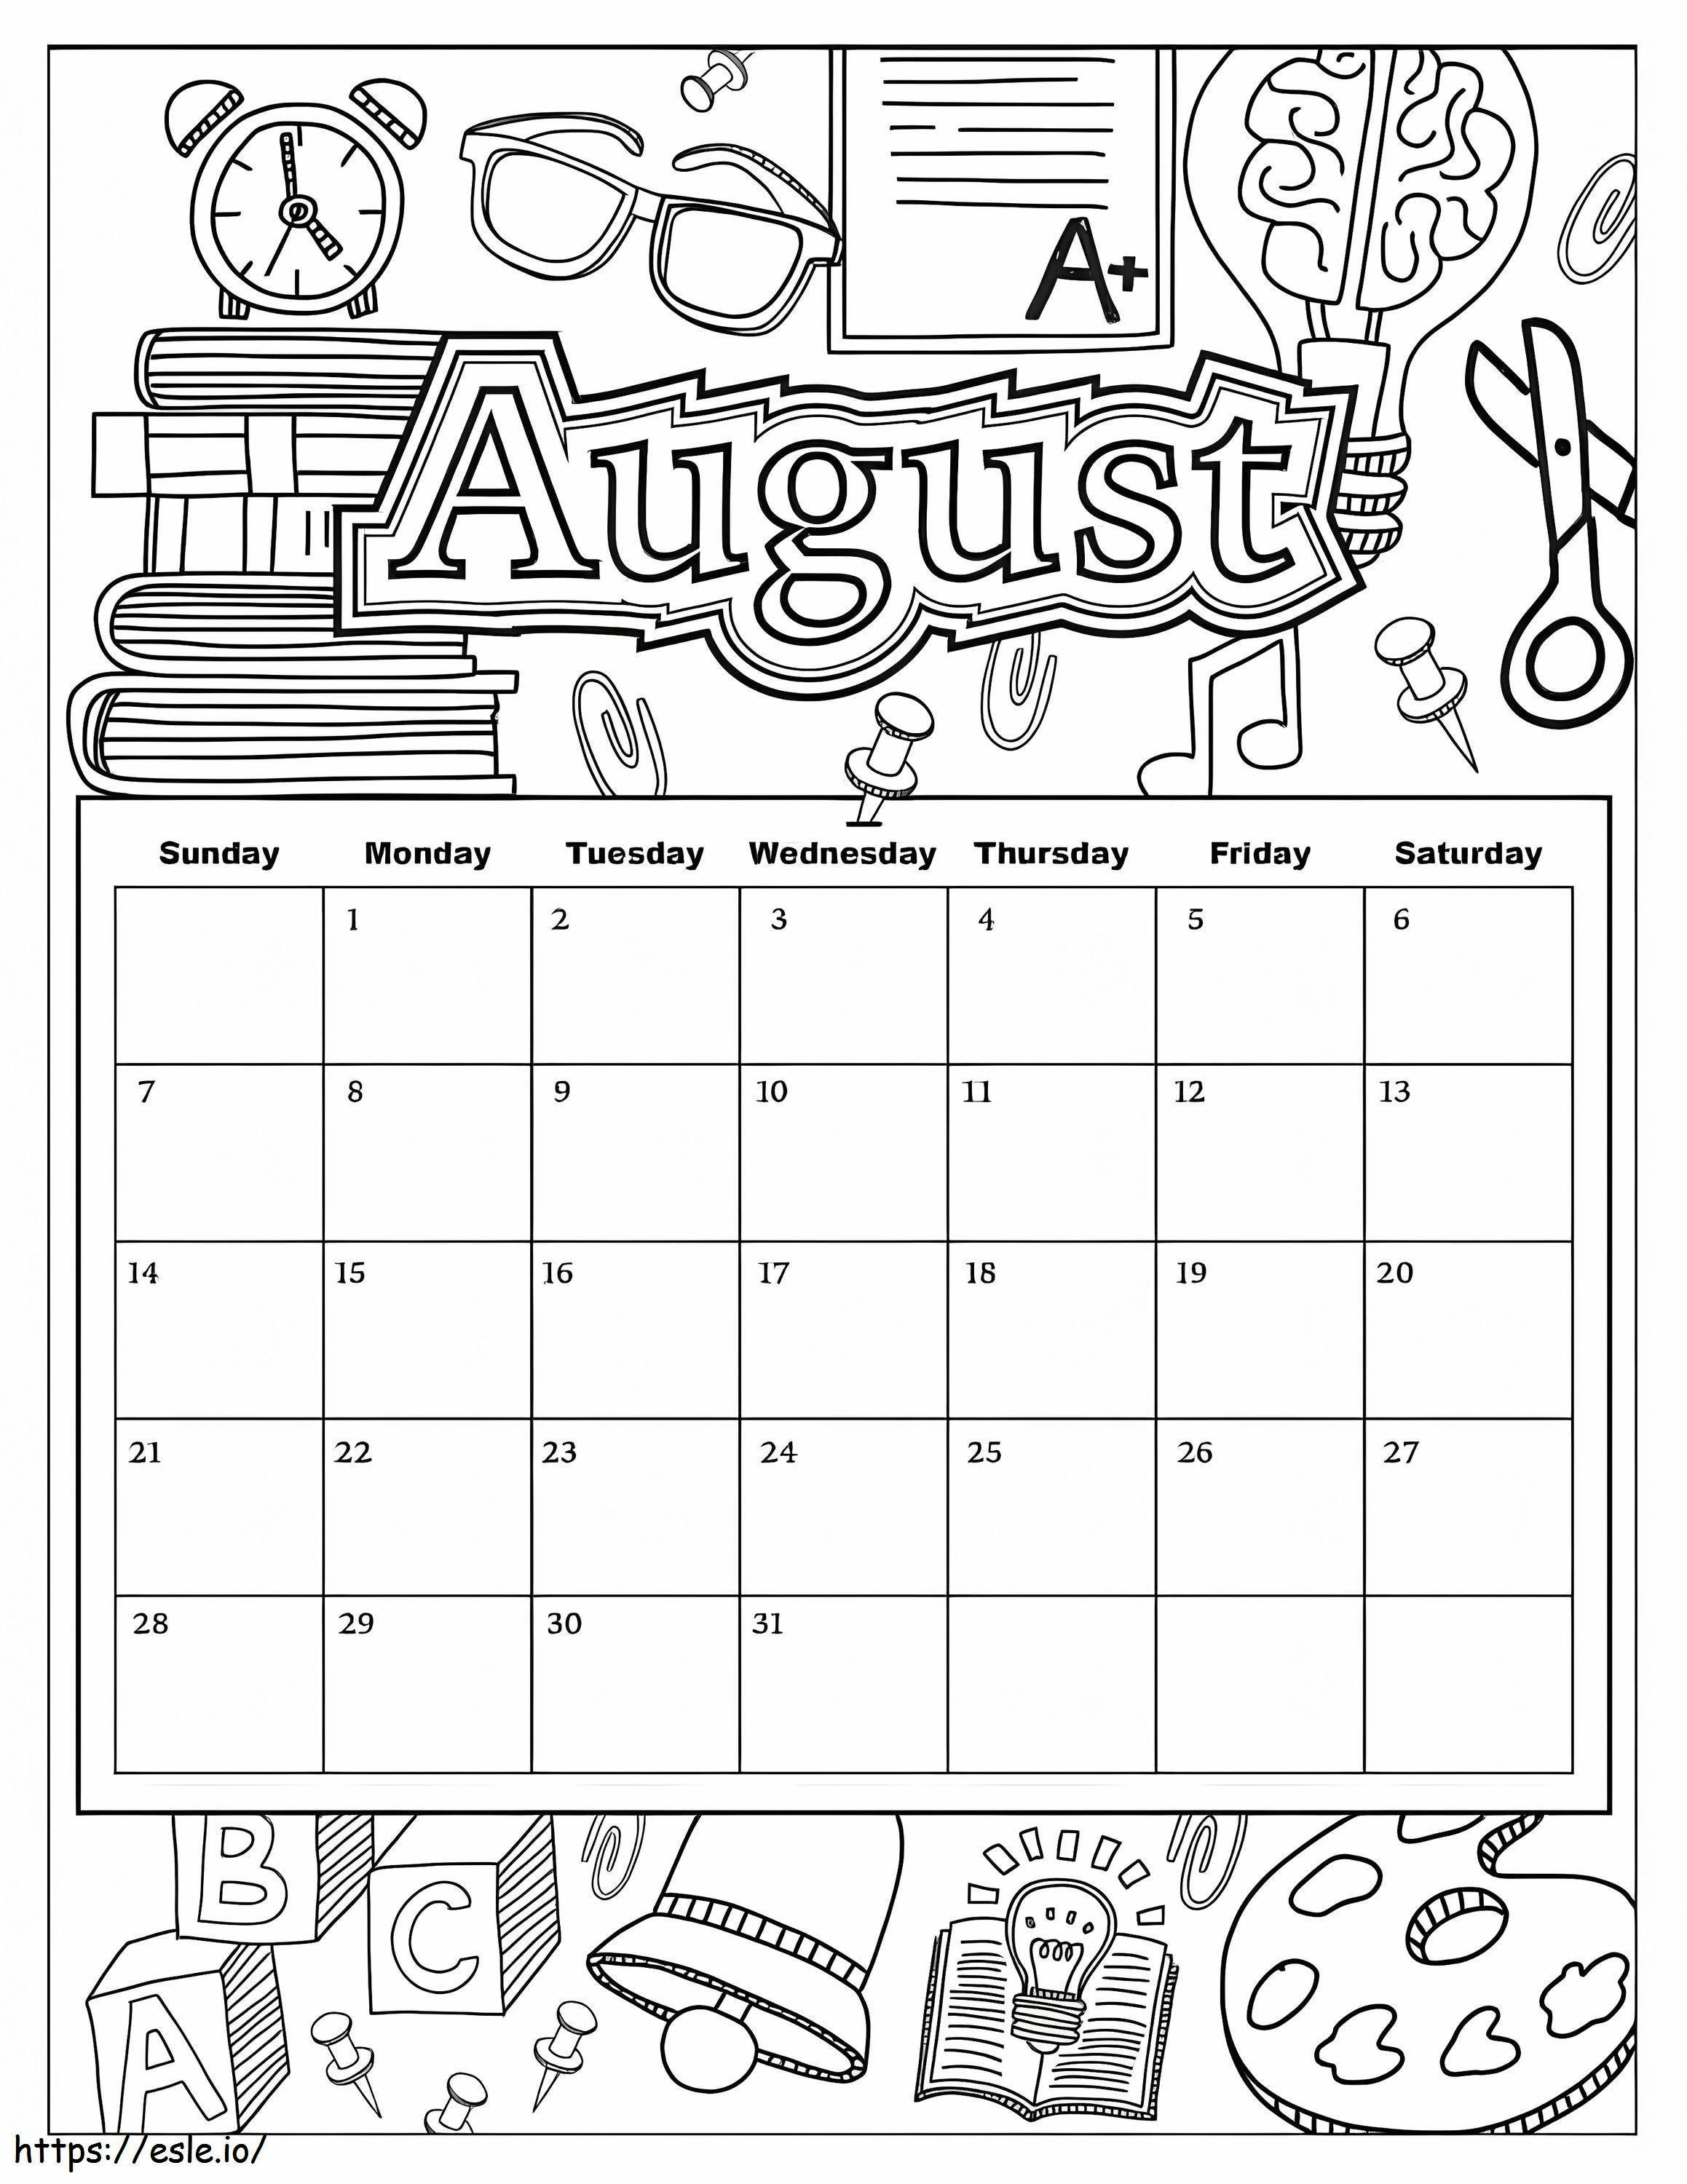 August Calendar coloring page